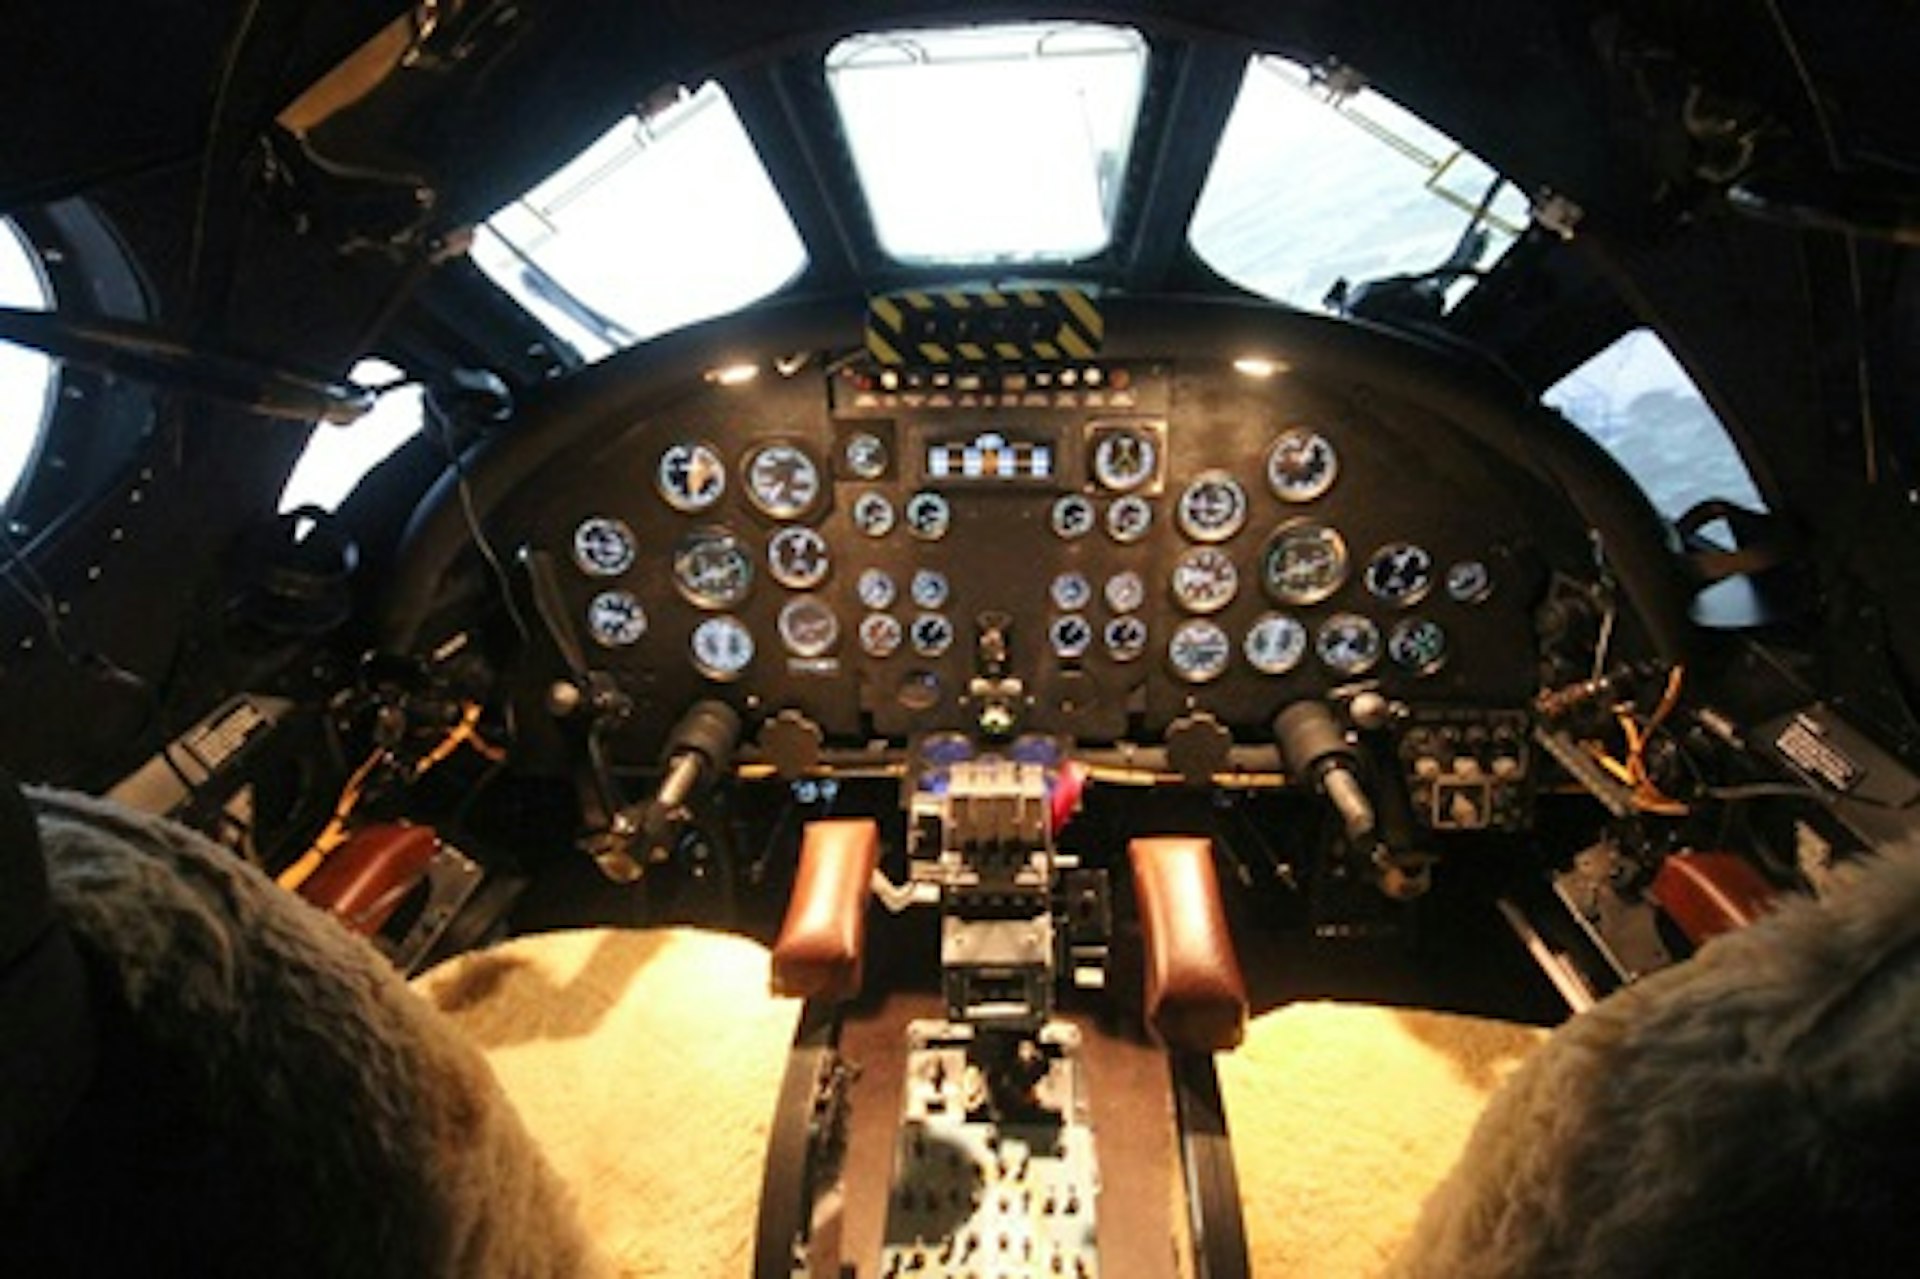 Fly the World's Only Vulcan Bomber Flight Simulator - 30 minutes 4